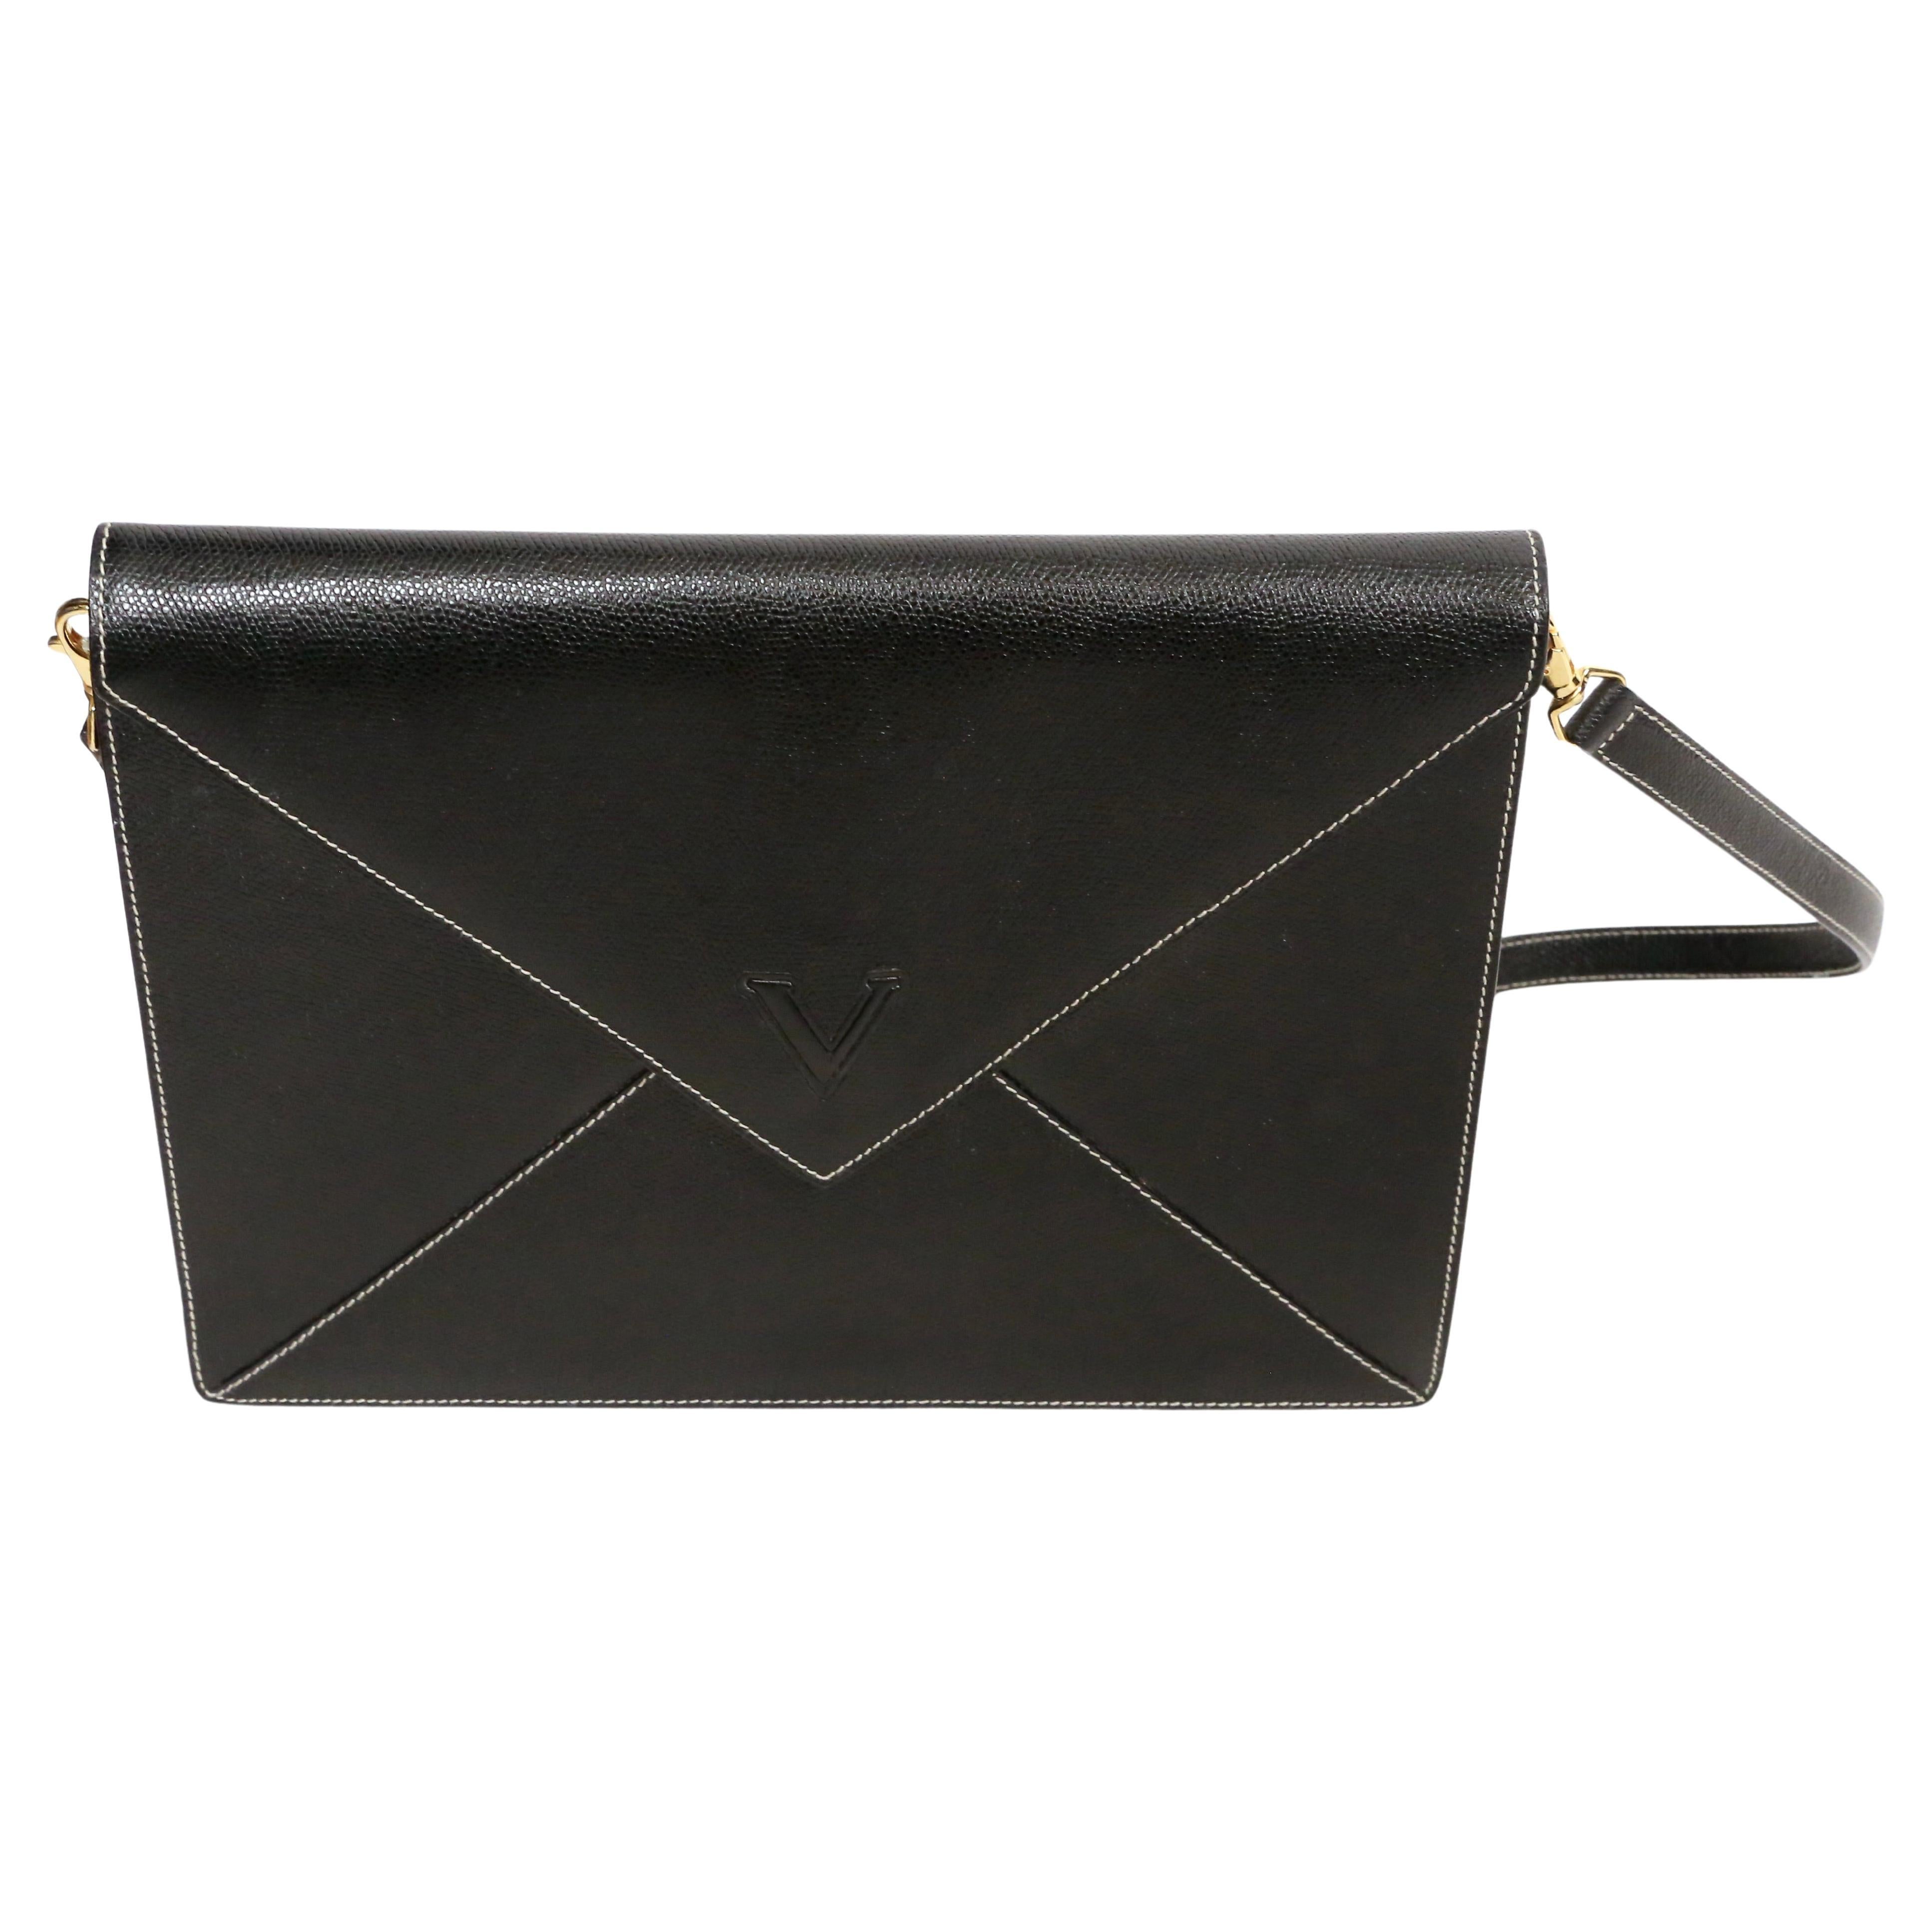  1990's VALENTINO black textured leather convertible 'envelope' clutch bag In Good Condition For Sale In San Fransisco, CA